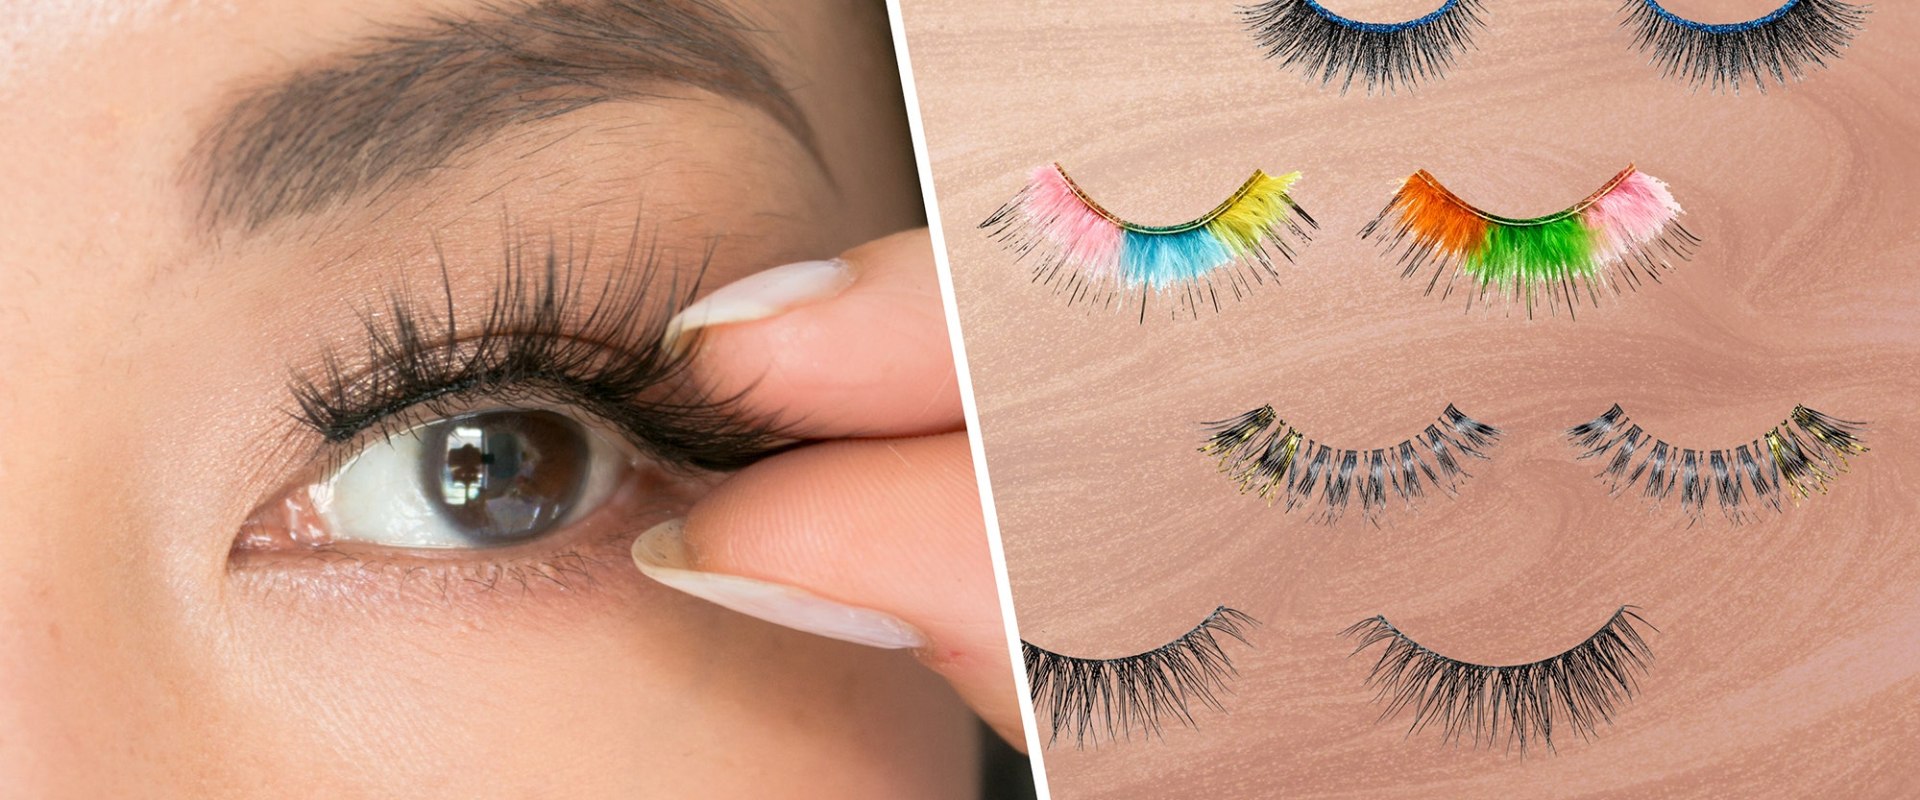 What is the best material for eyelashes?